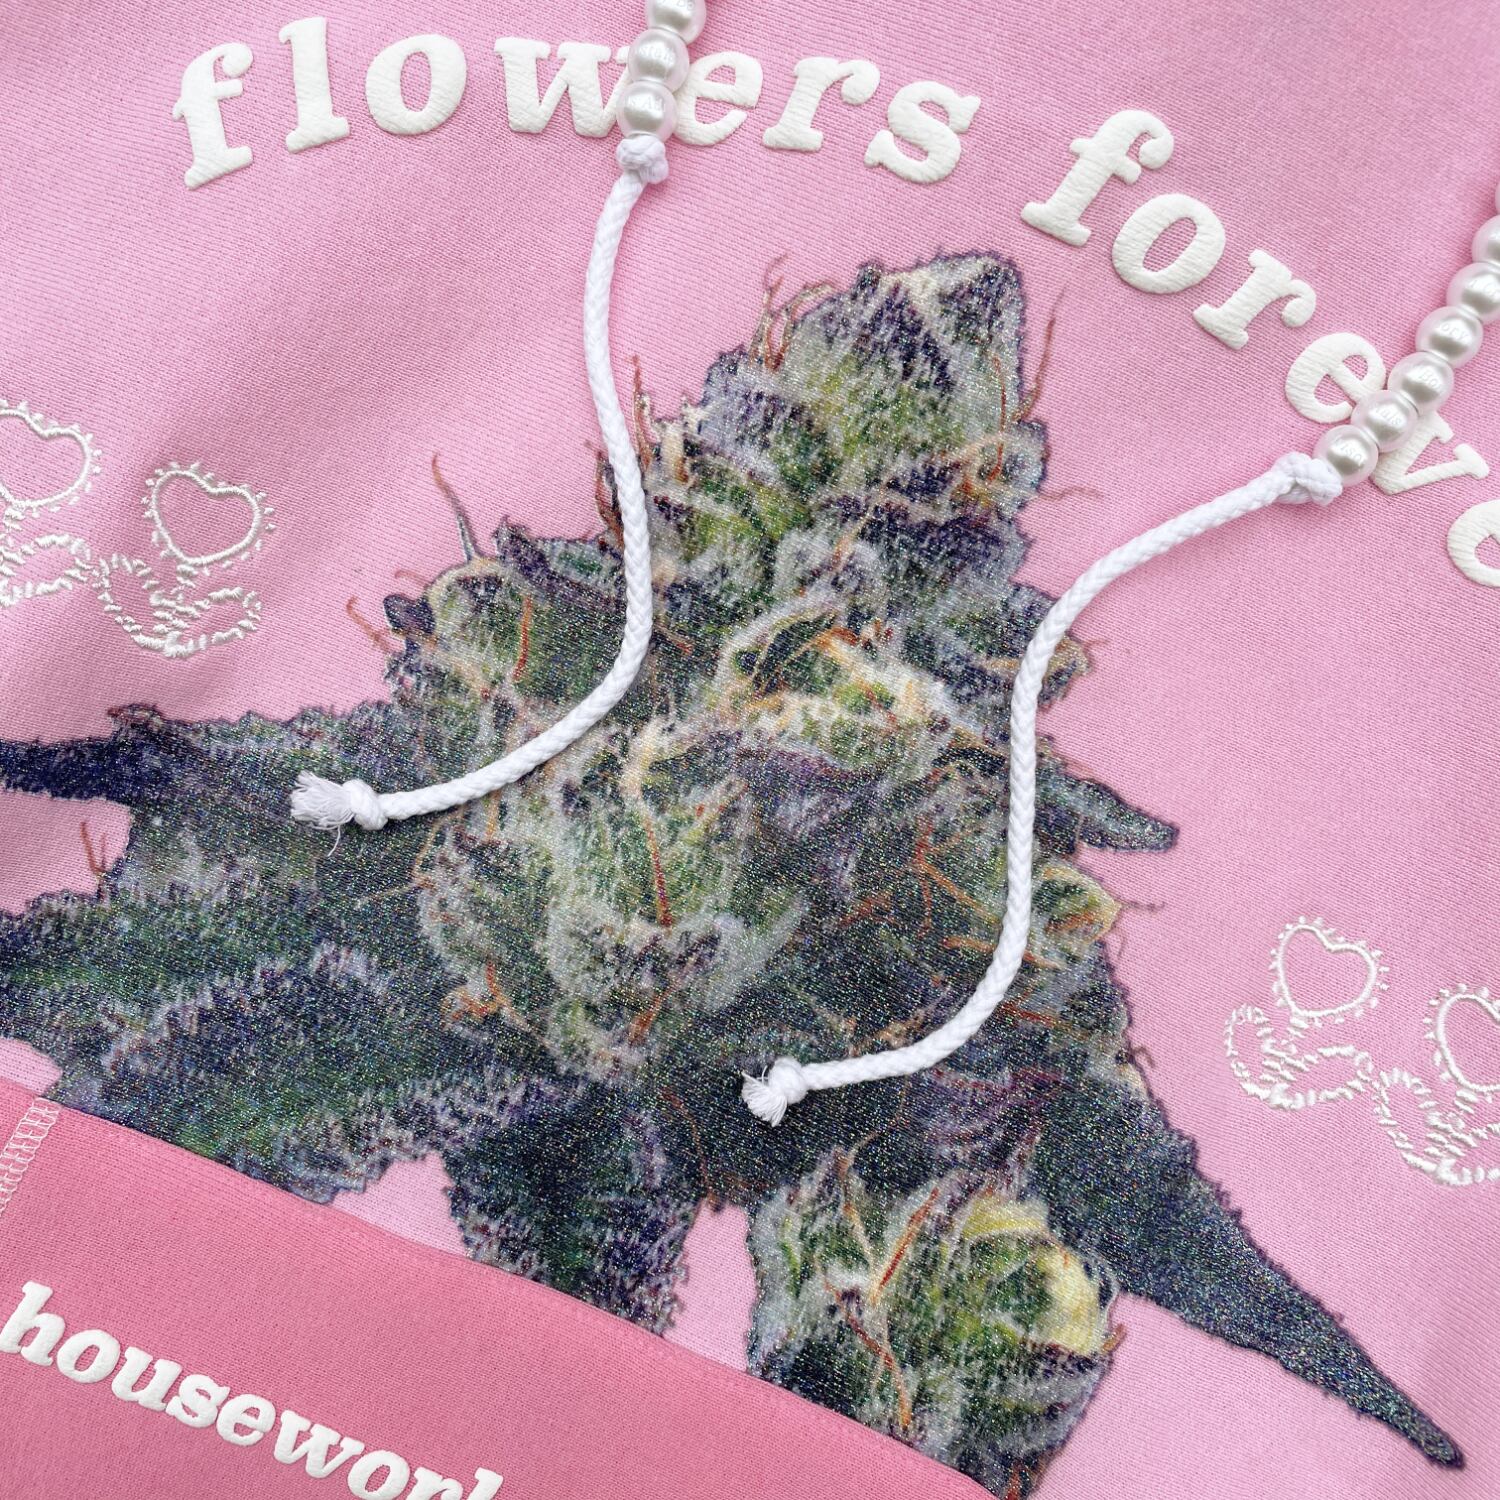 Advisory Board Crystals Abc. Flowers Forever Hoodie